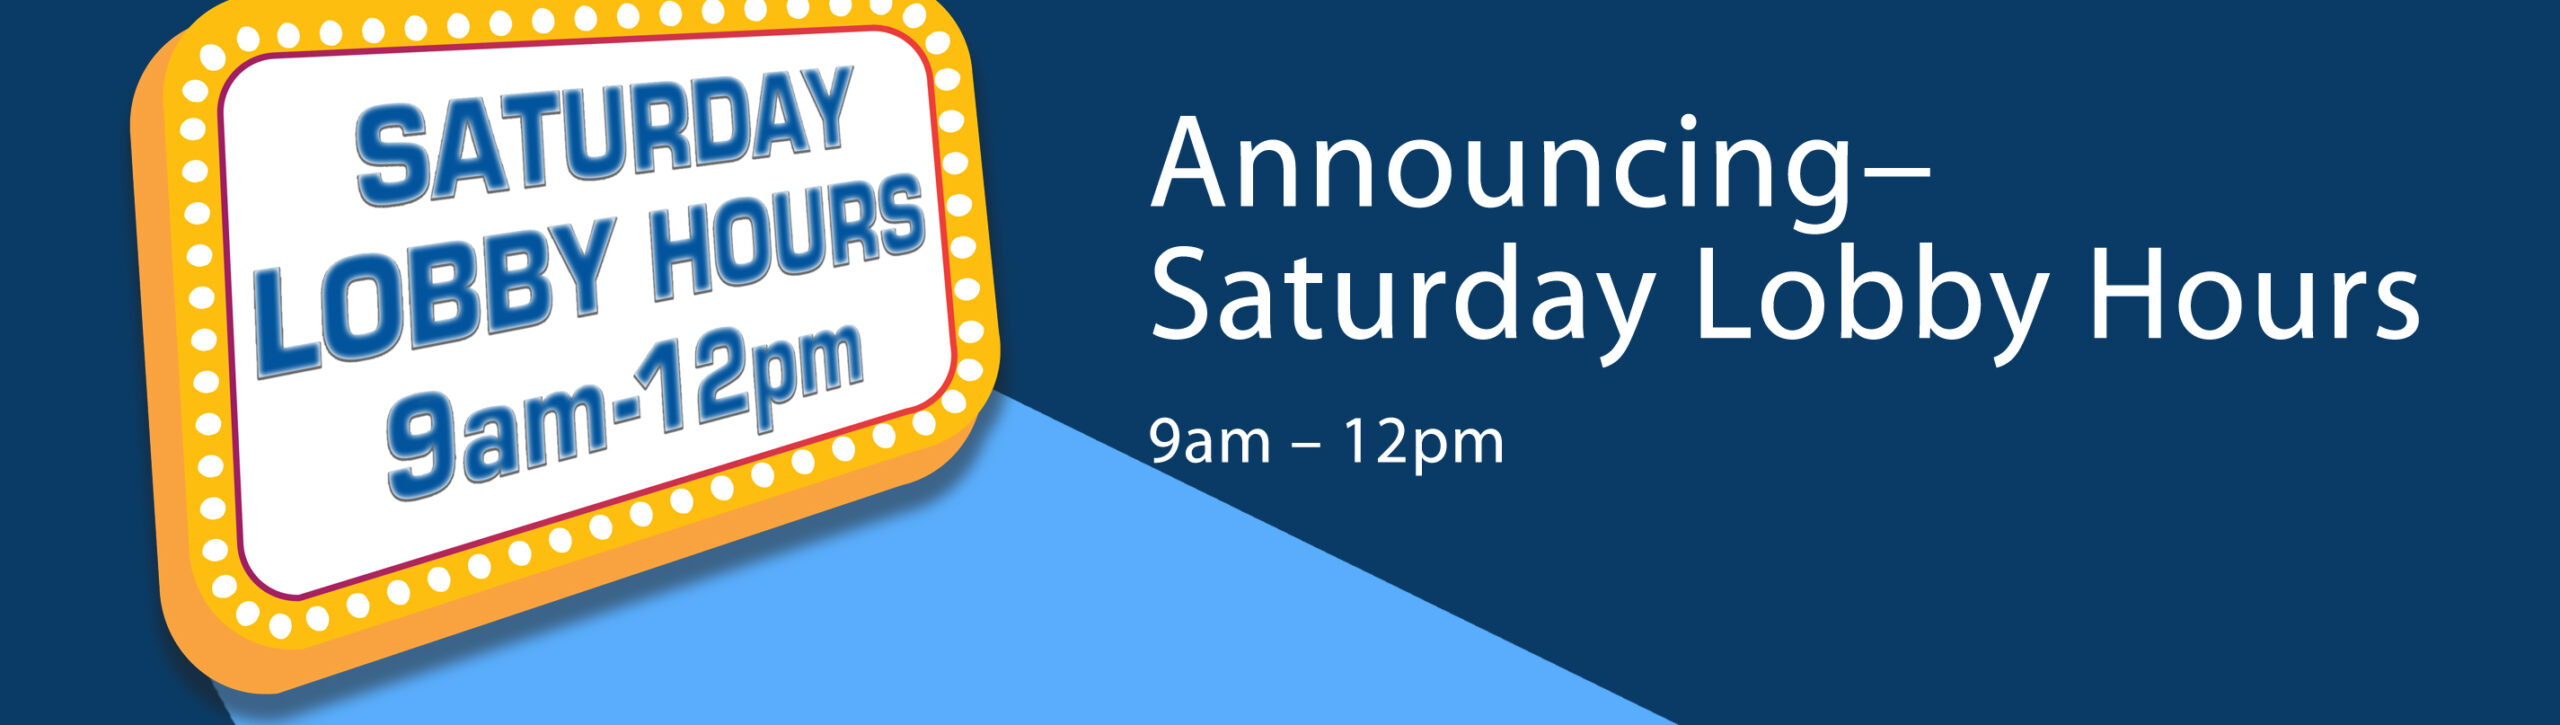 Movie marque, Announcing- Saturday Lobby Hours, 9am-12pm